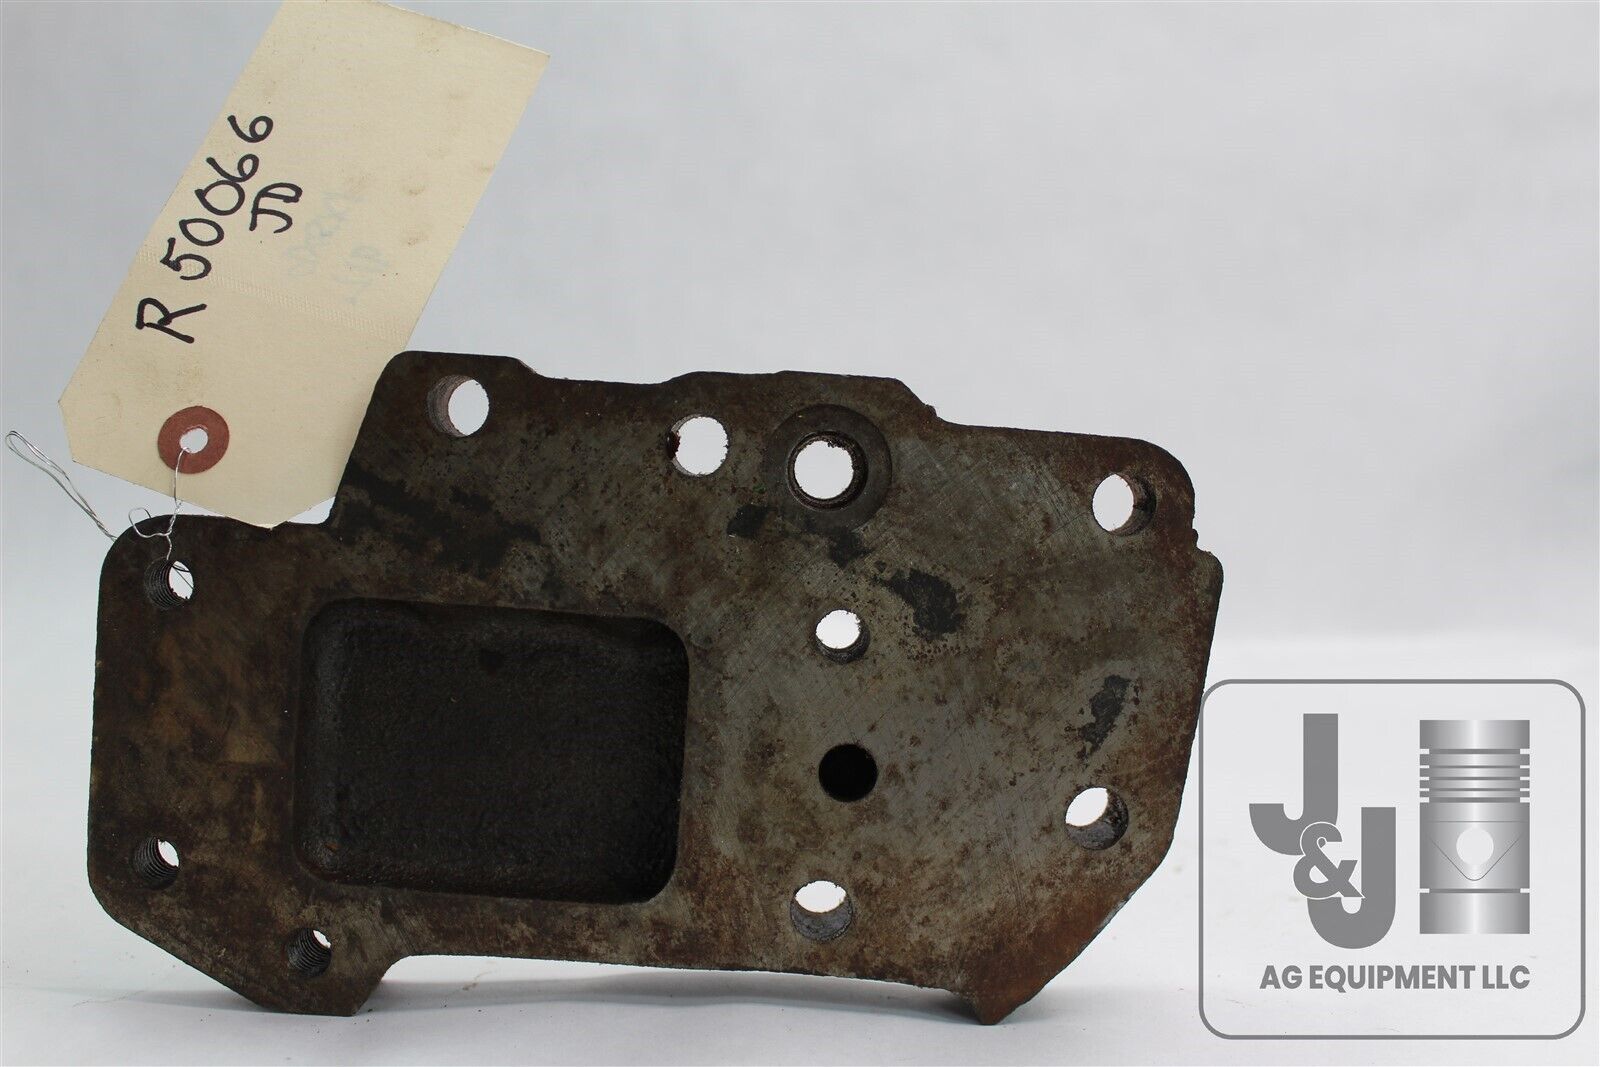 USED JOHN DEERE R50066 / AR54331 SELECTIVE CONTROL VALVE COVER PLATE 4520, 4620